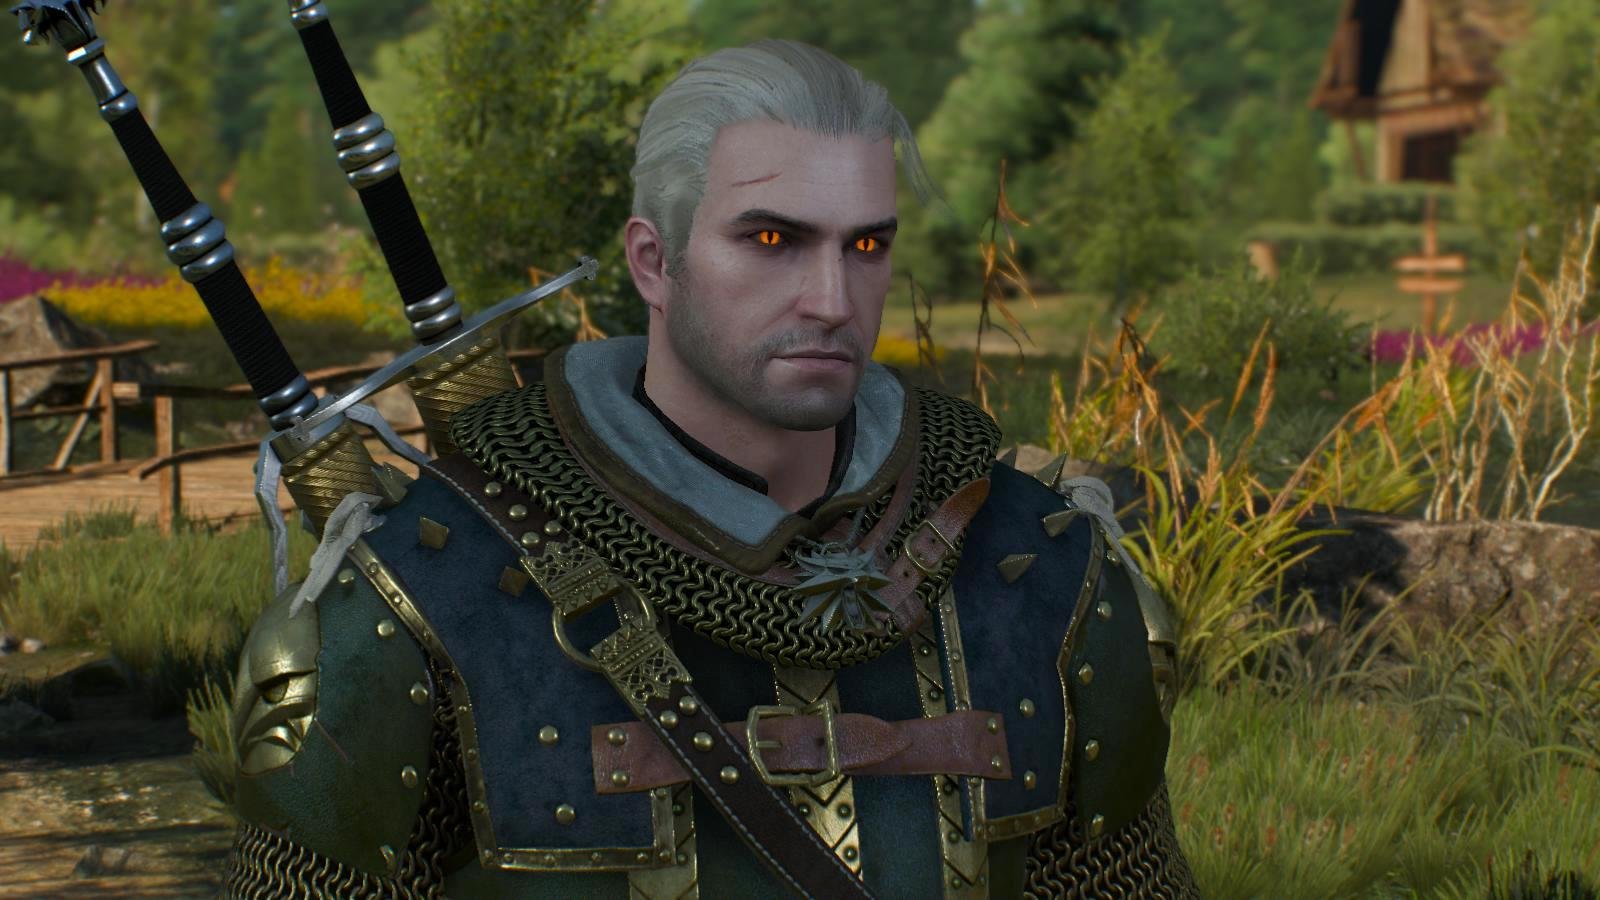 The witcher 3 a knight's tale